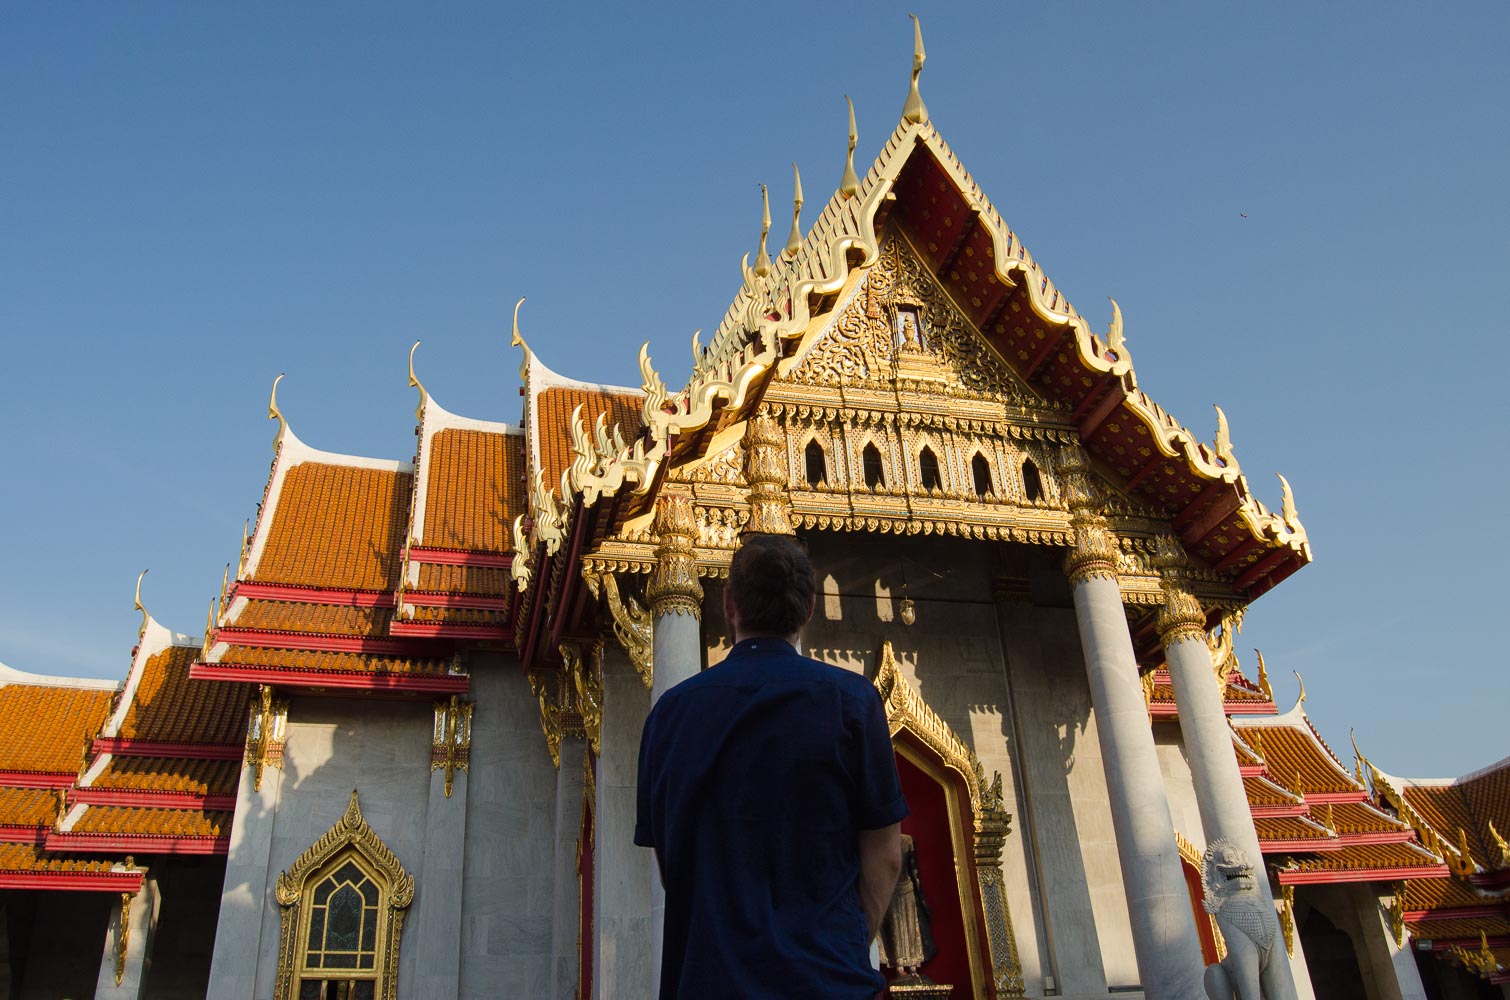 Introvert man alone staring at the Marble Temple in Bangkok